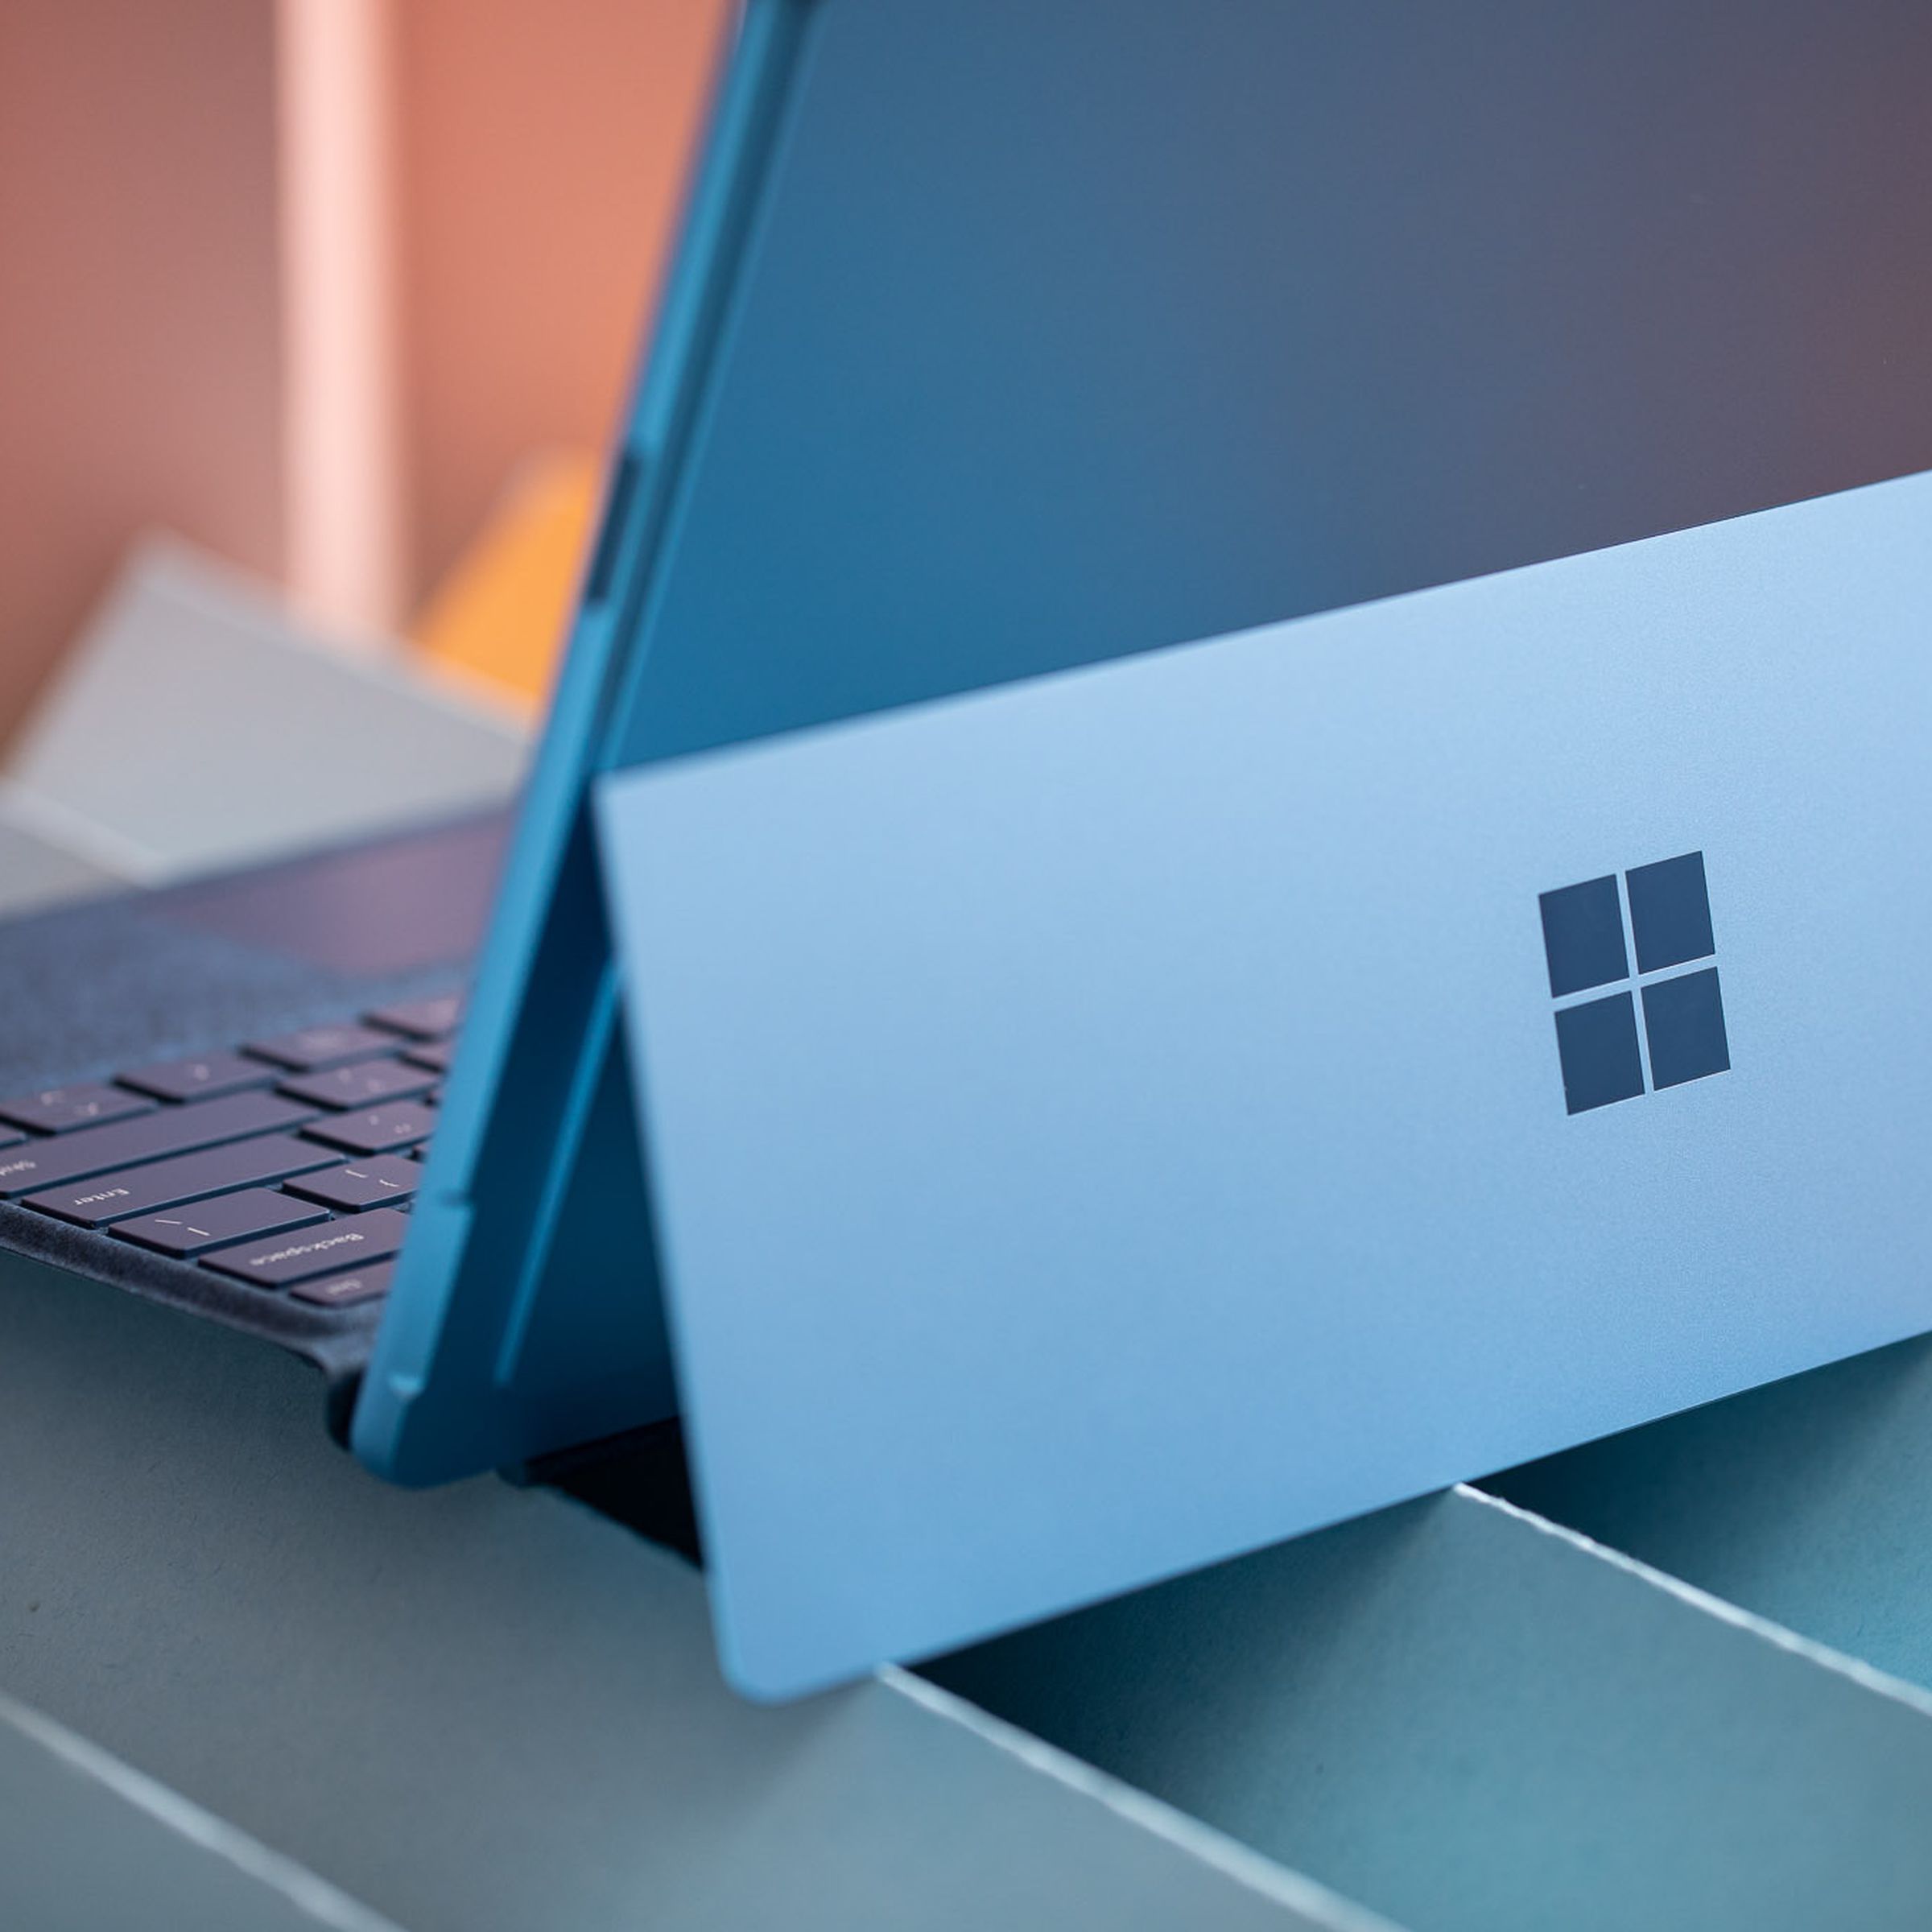 The Surface Pro 9 in laptop mode seen from beind.